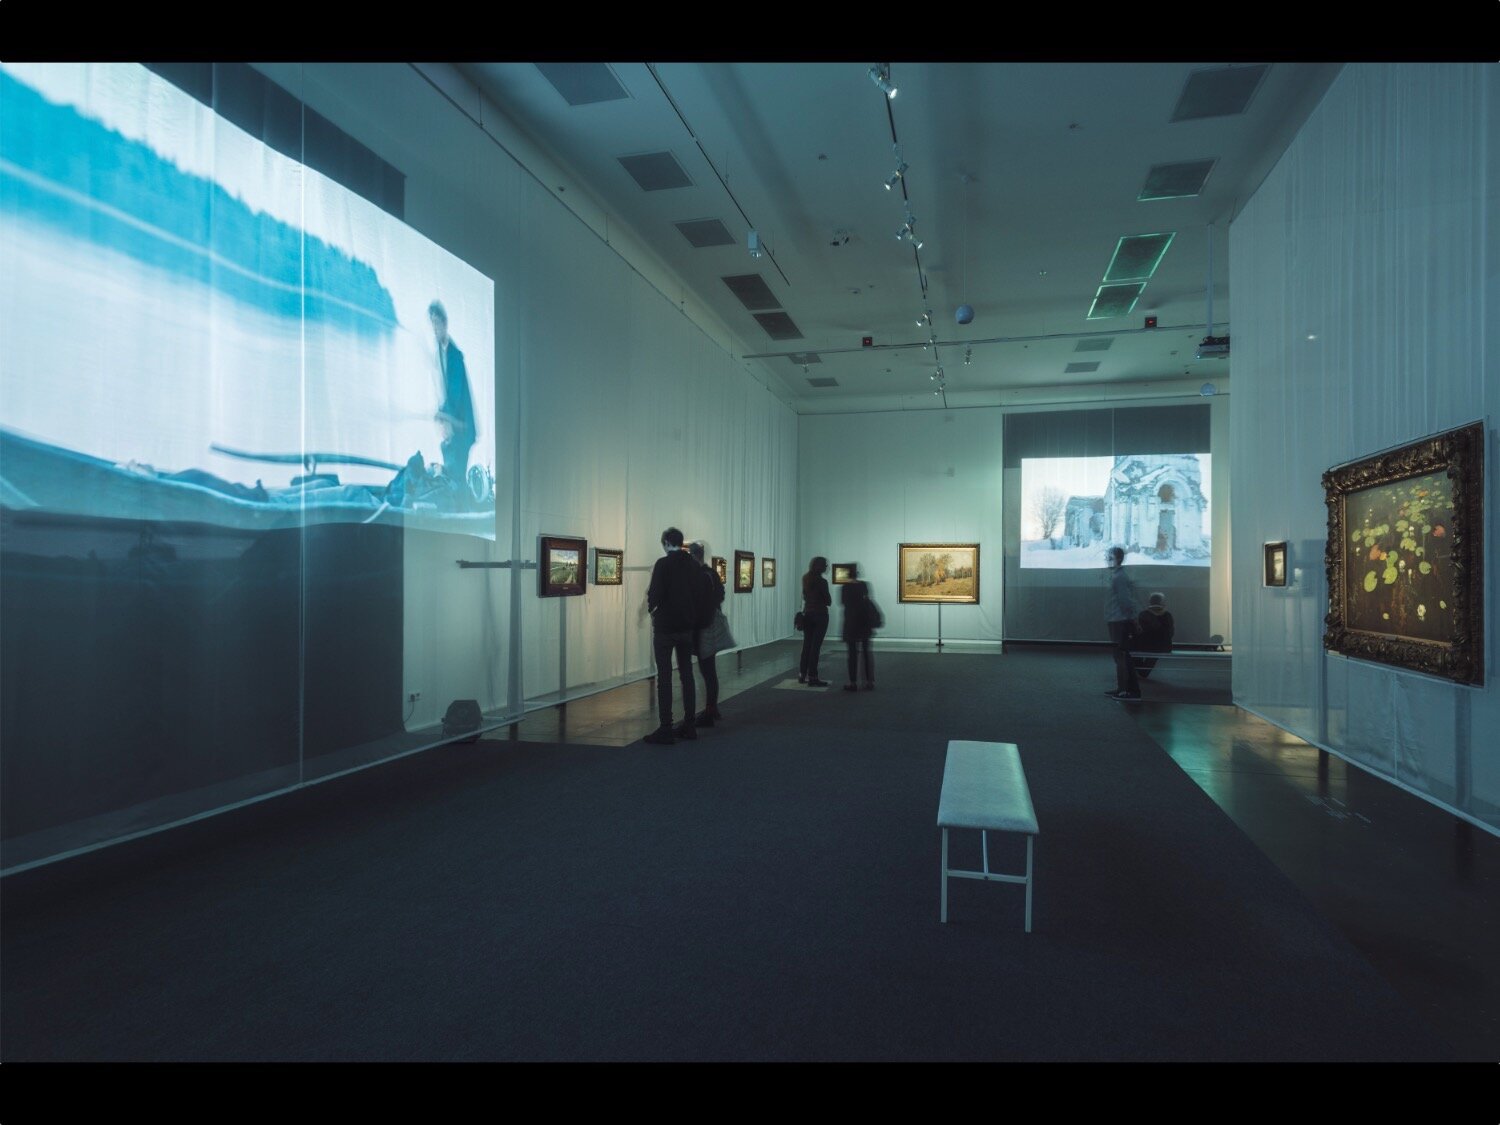  Isaac Levitan and Cinematography
Jewish Museum and Tolerance Center
Moscow, 2018
(photo courtesy of JMTC) 